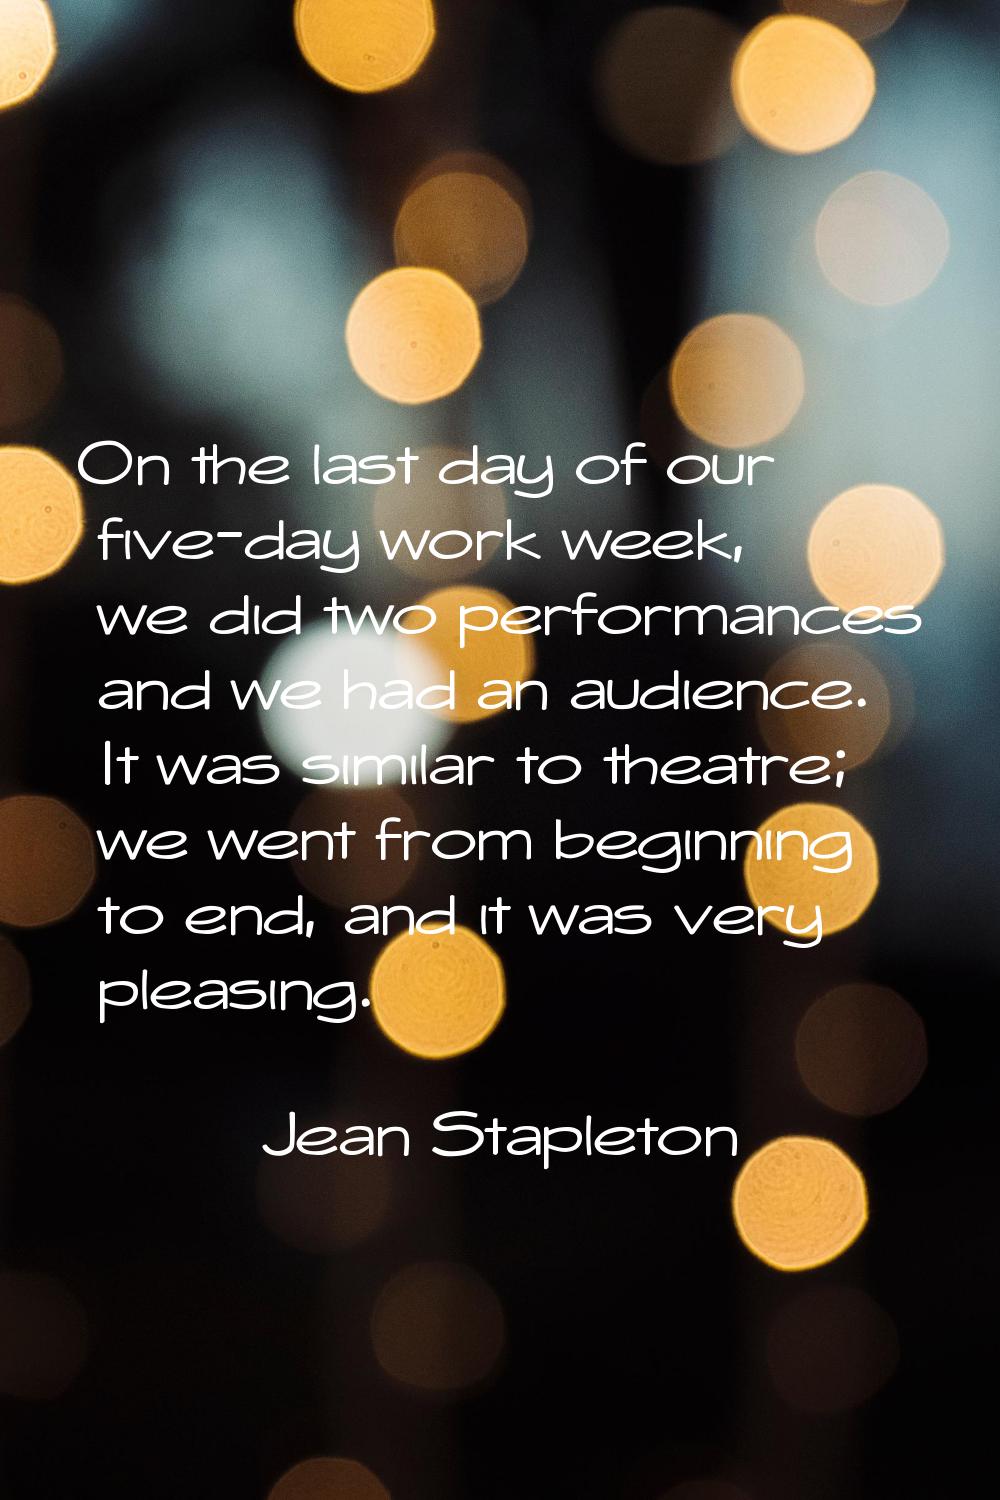 On the last day of our five-day work week, we did two performances and we had an audience. It was s